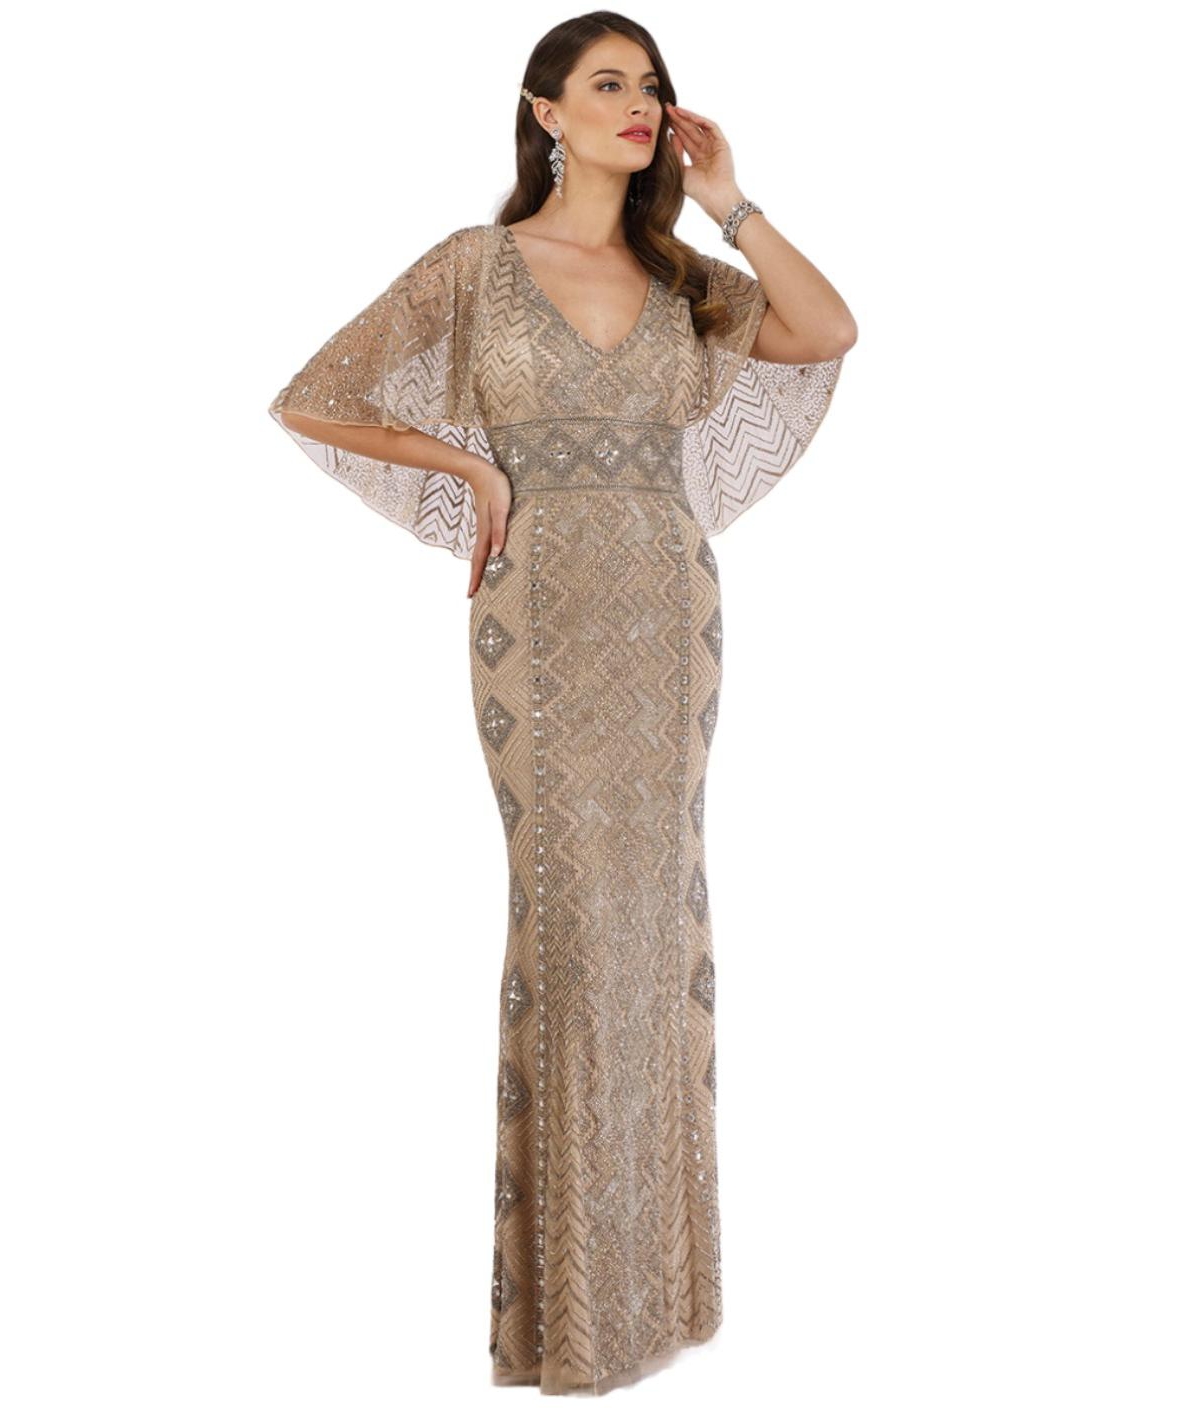 Women's Cape Sleeve V-Neck Beaded Gown - Nude/silver